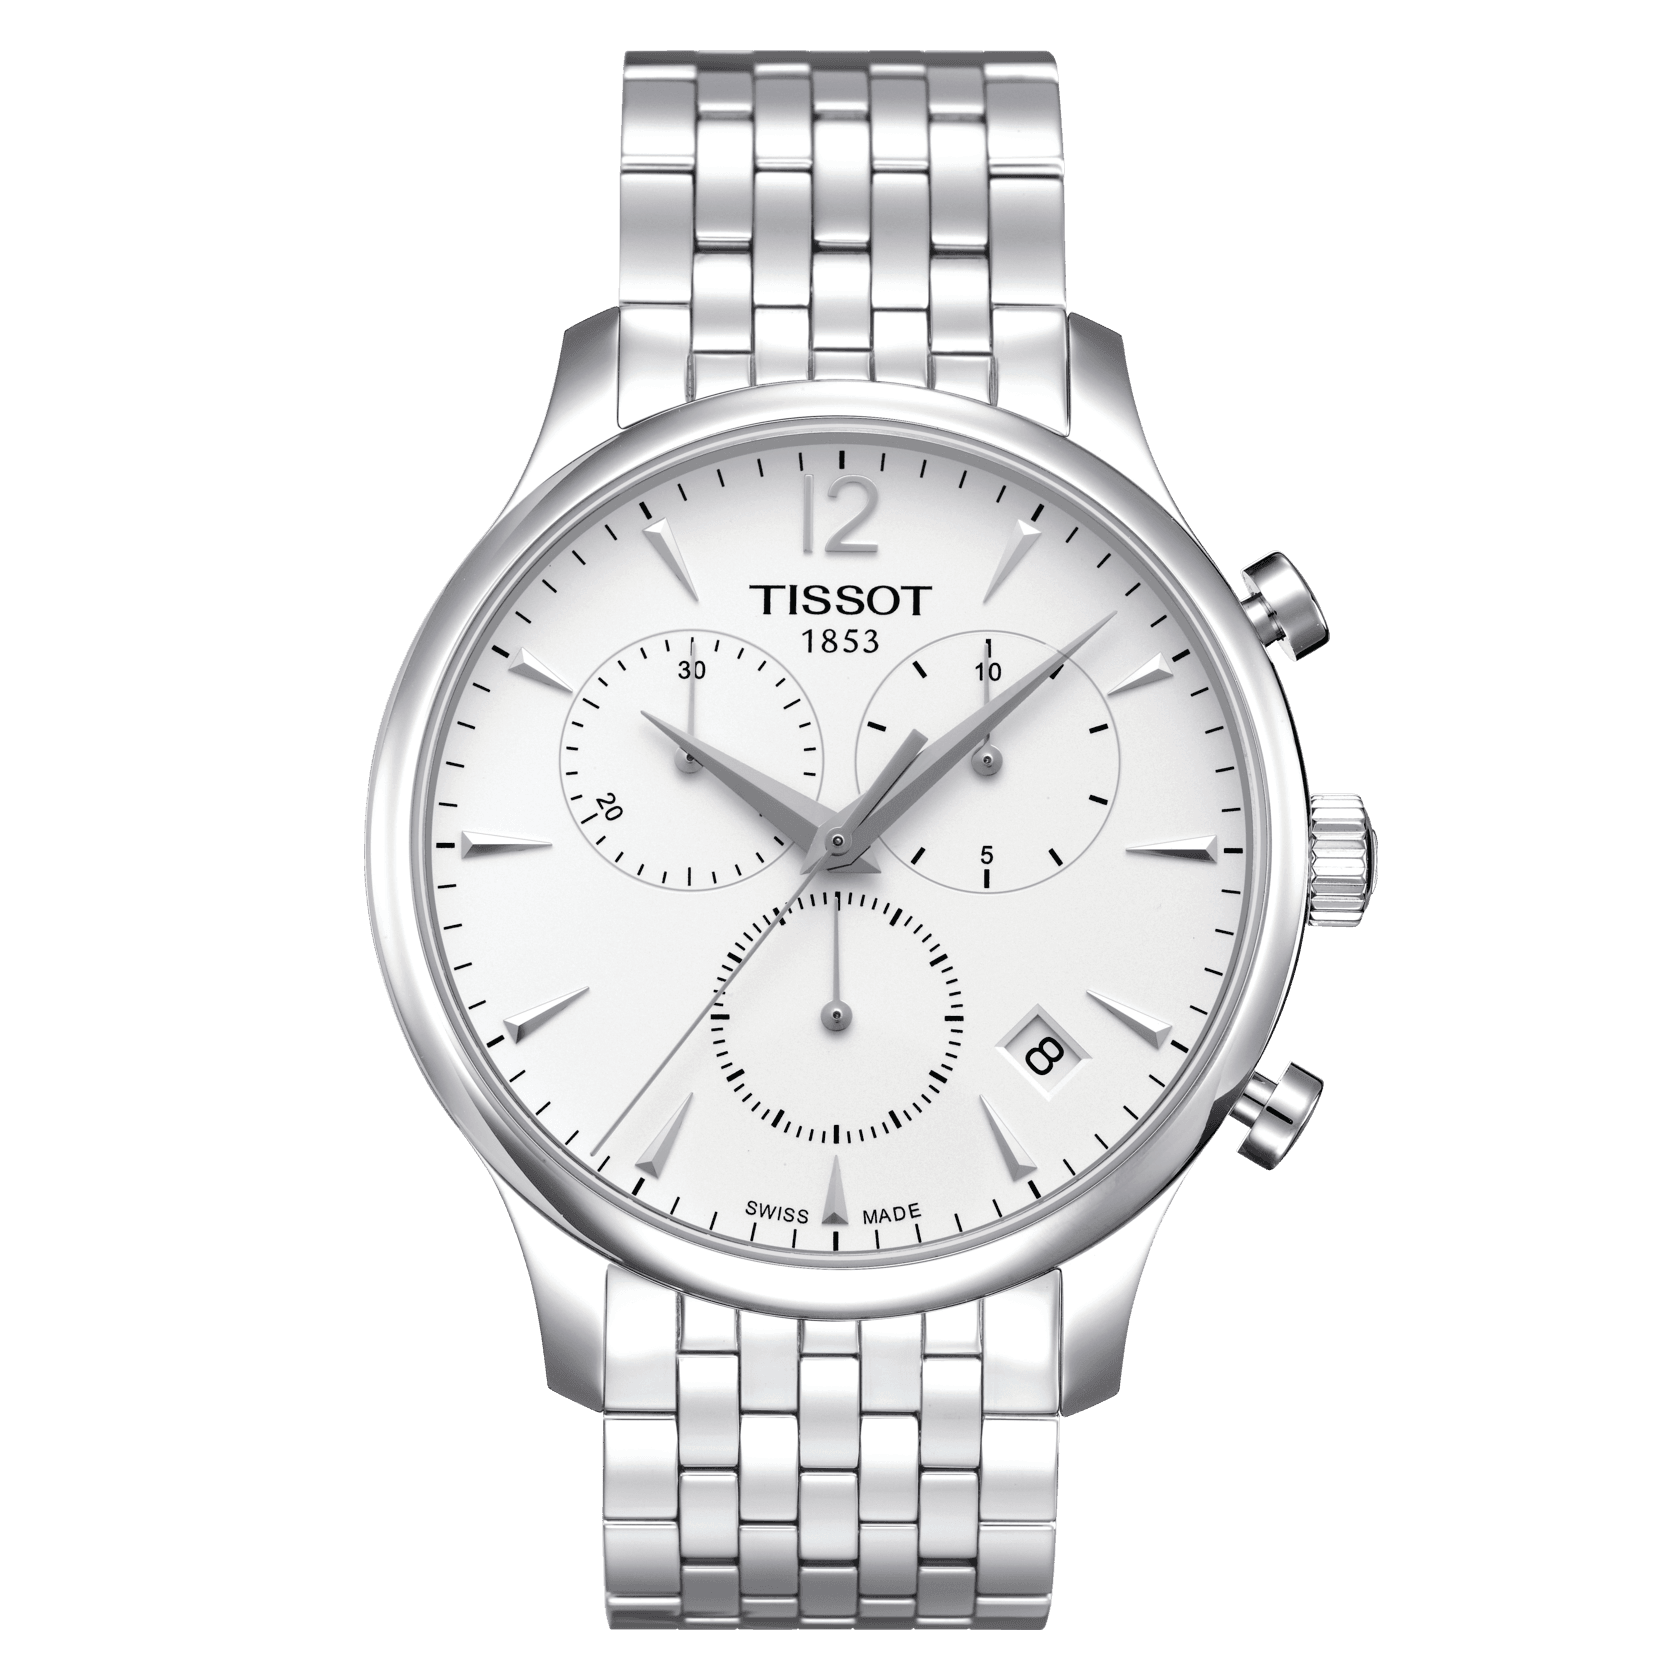 Tissot T-Trend Stainless Steel Chronograph Men's Watch - Kamal Watch Company